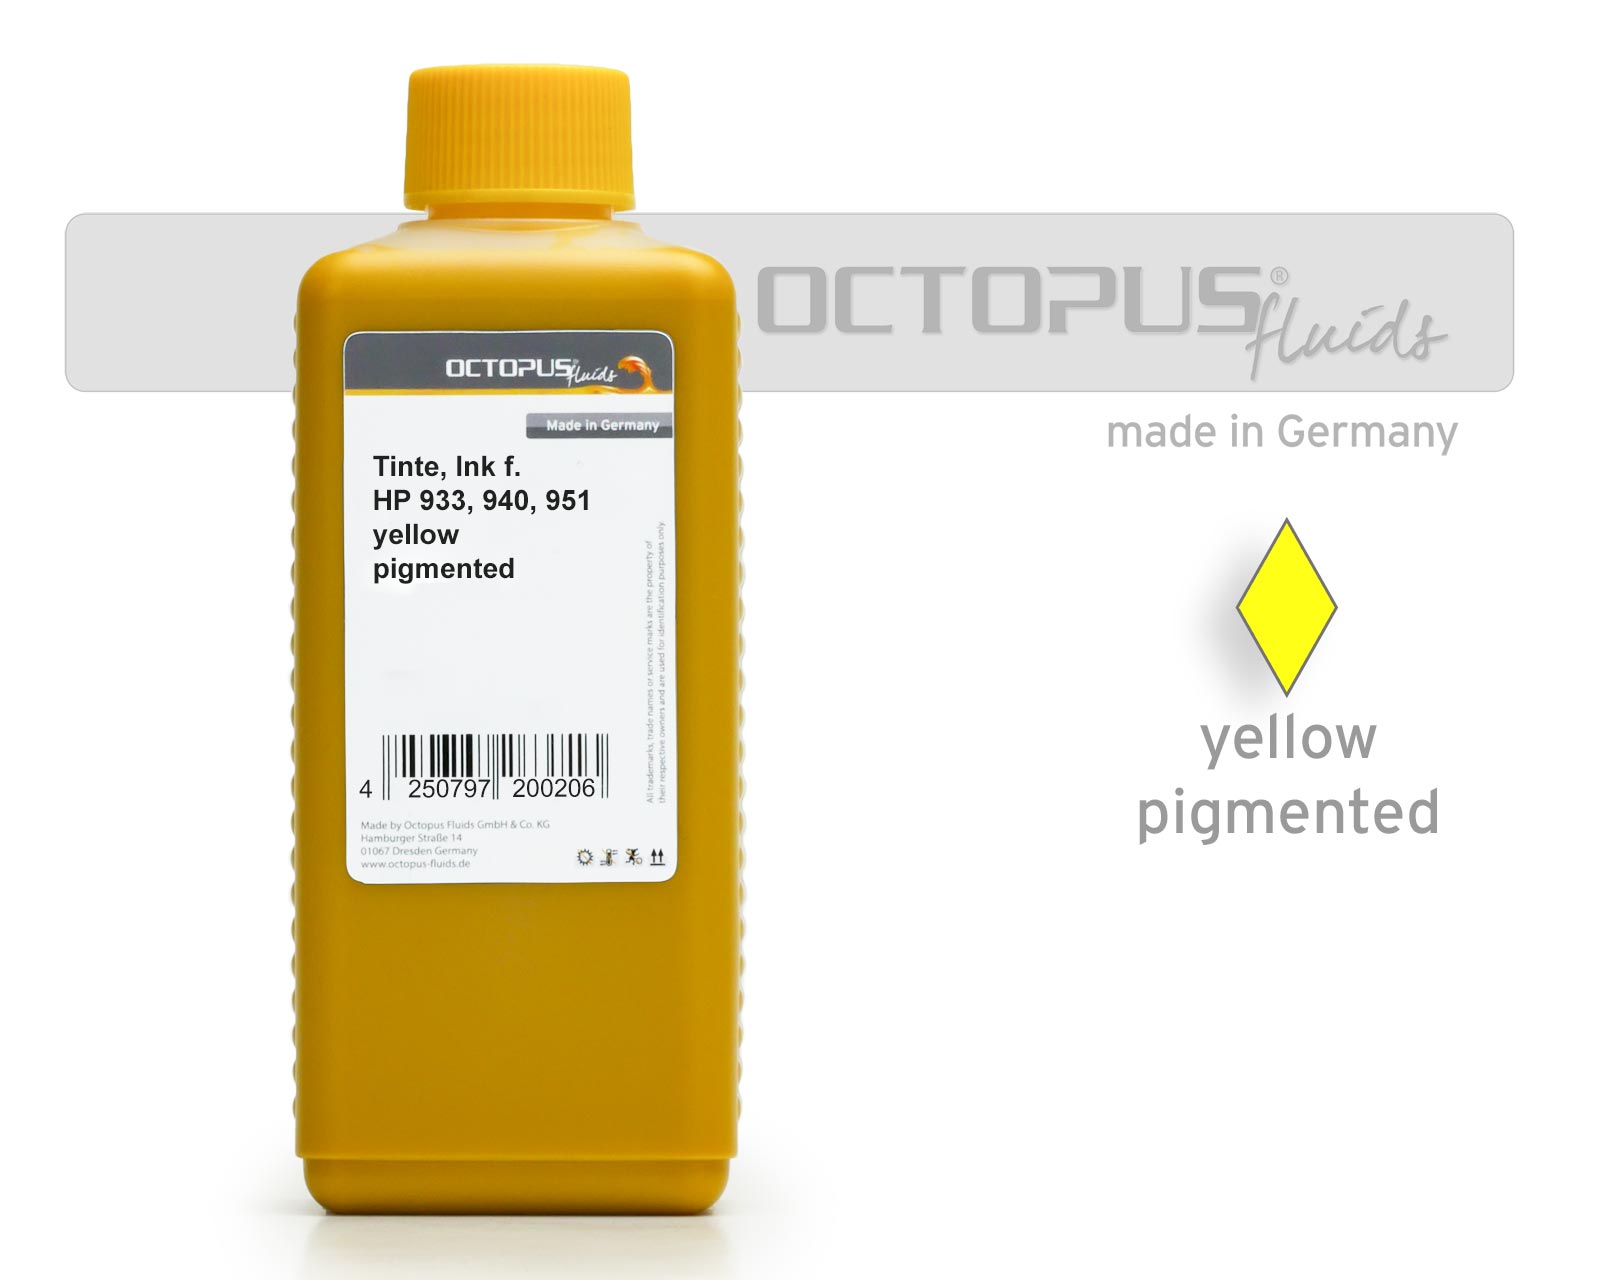 Octopus Refill Ink for HP 933, 940, 951 pigmented yellow